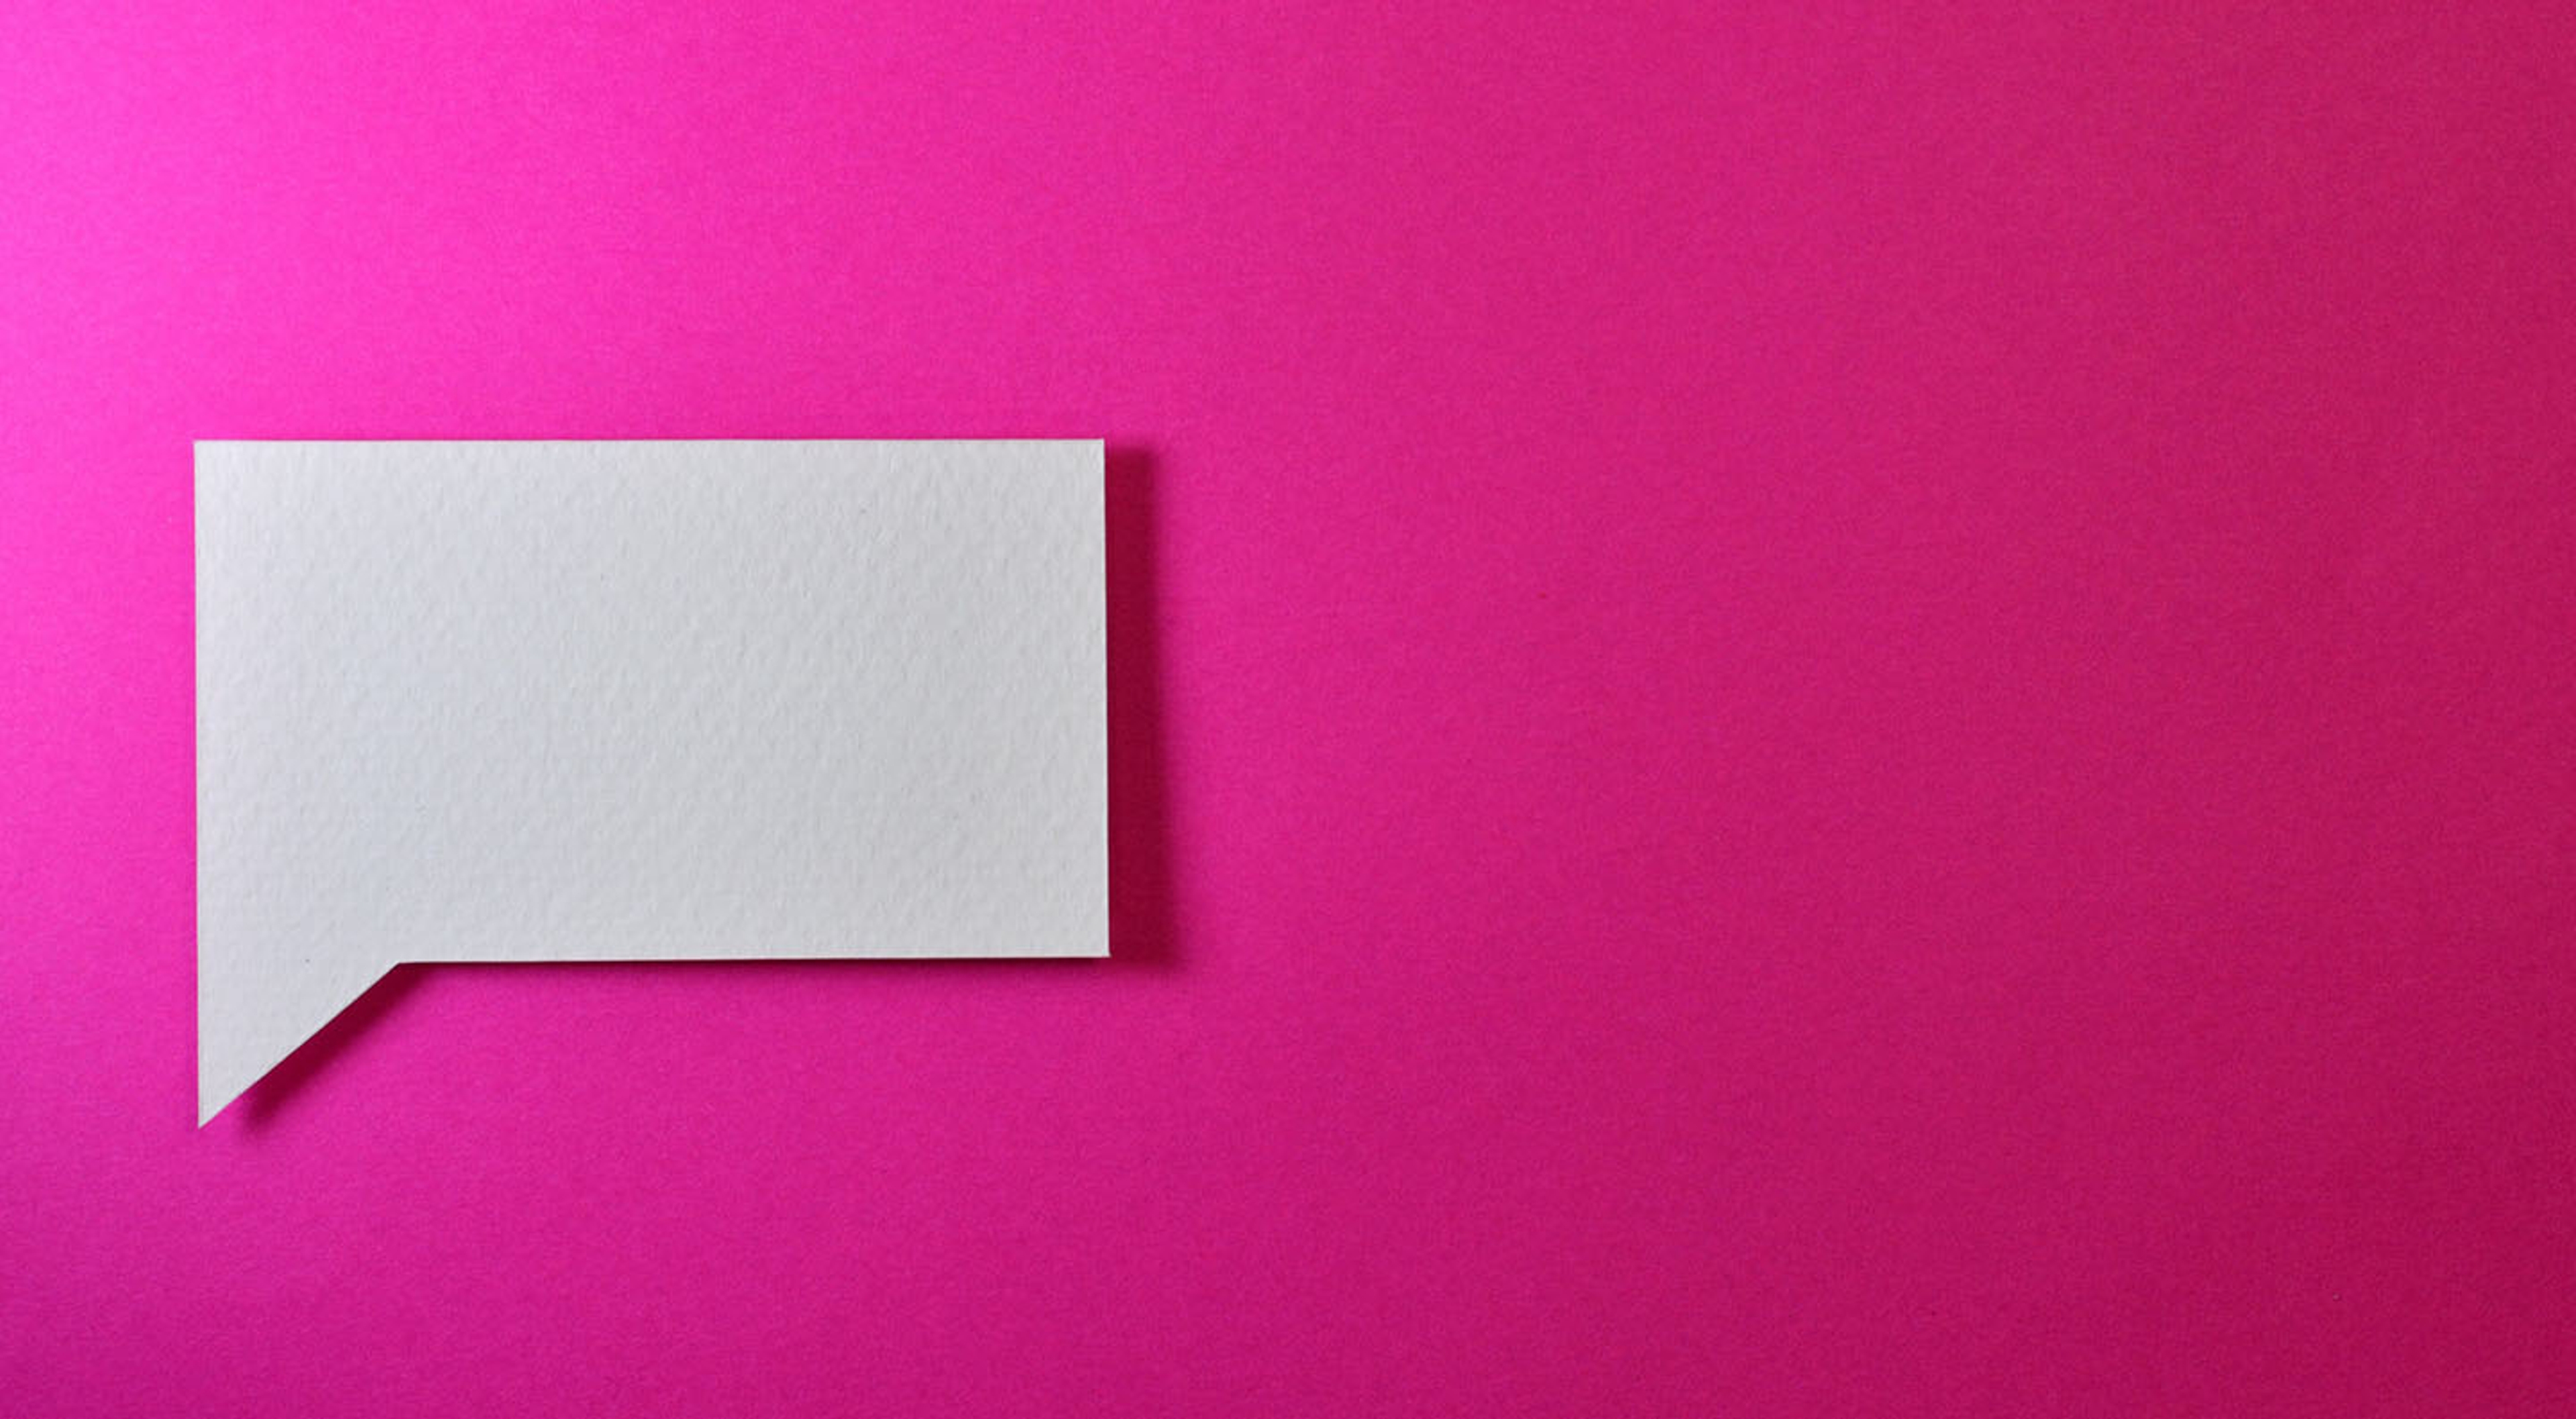 Decentraland white paper depicted as a white cardboard speech bubble on a pink background